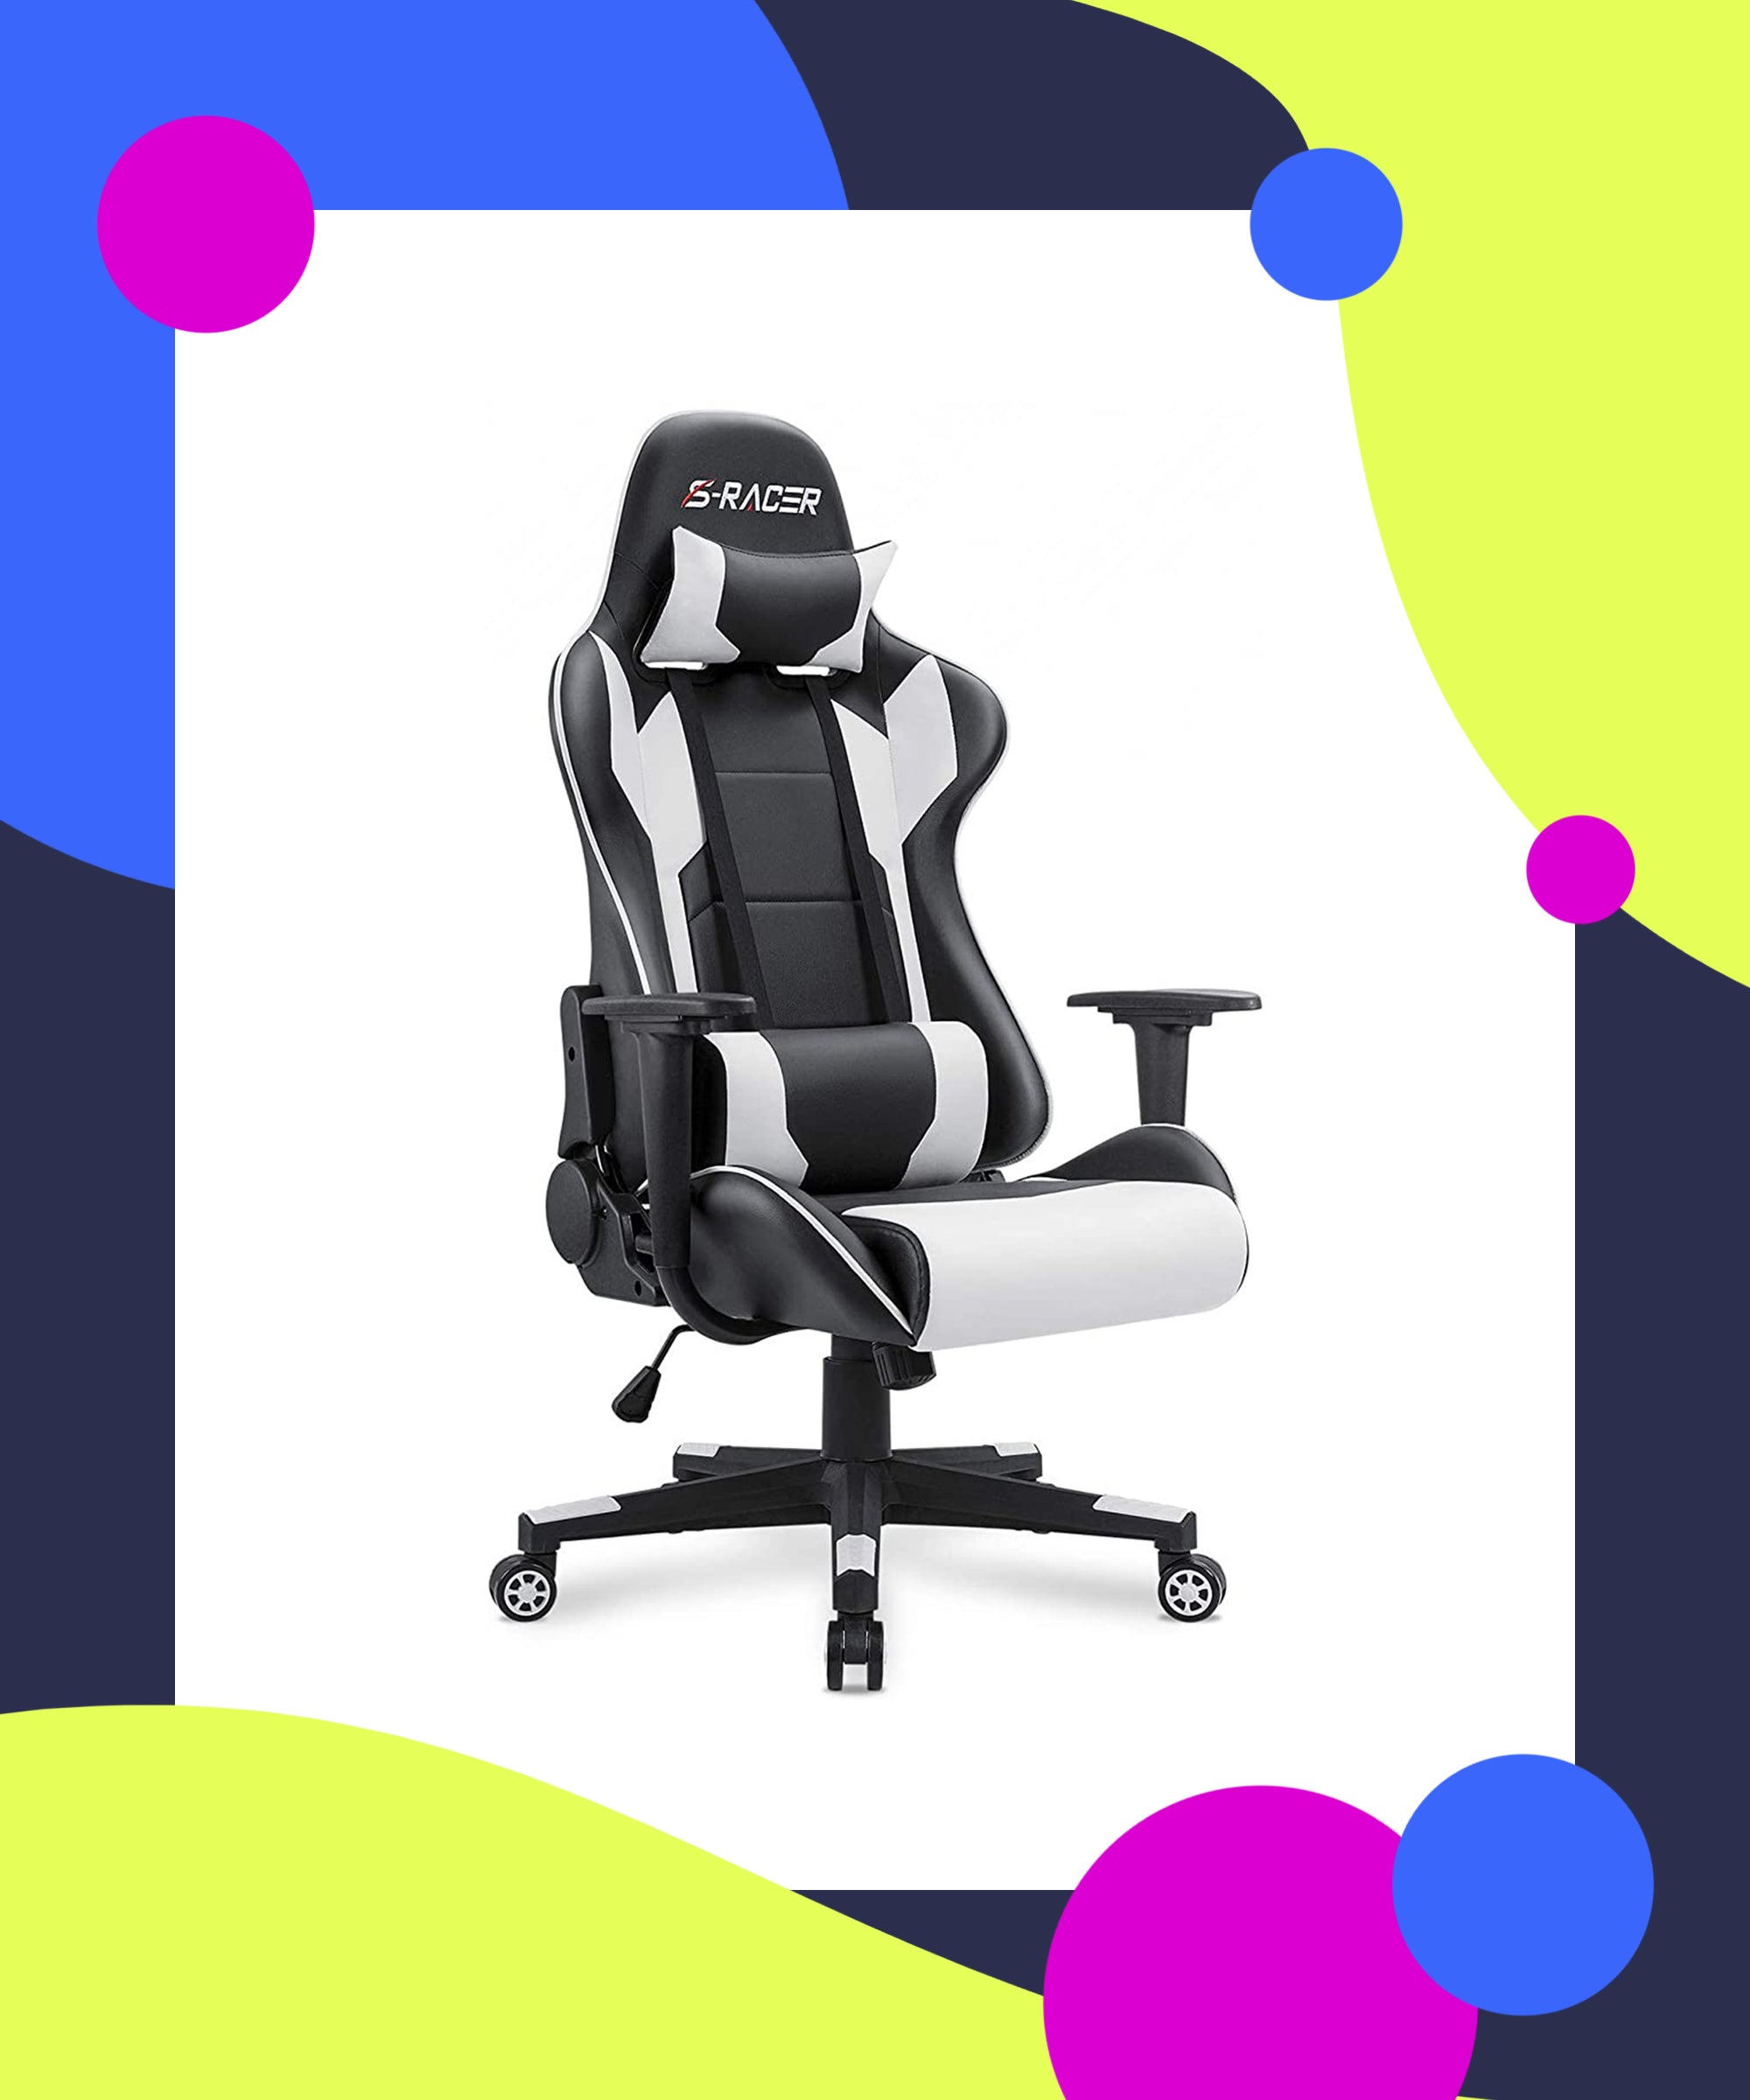 10 Best Office Chairs for Lower Back Pain to Buy in 2023 - Desk Chairs for  Home, Work, and Every Budget